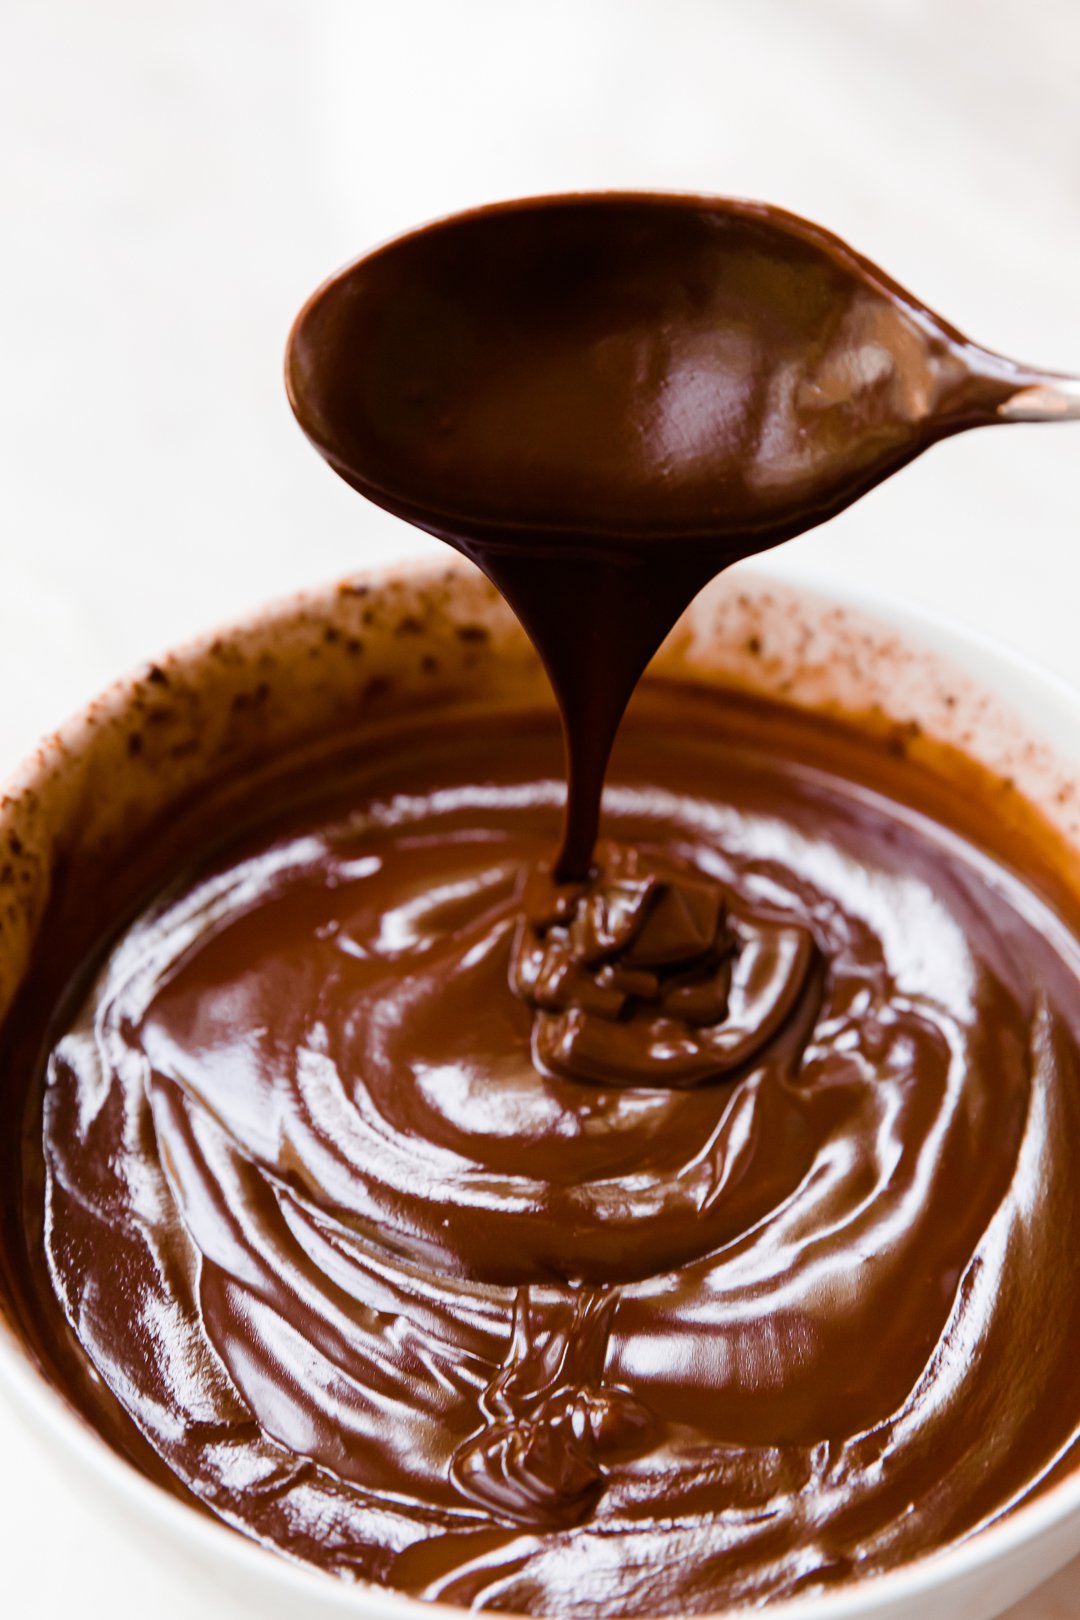 Ganache dripping from a spoon